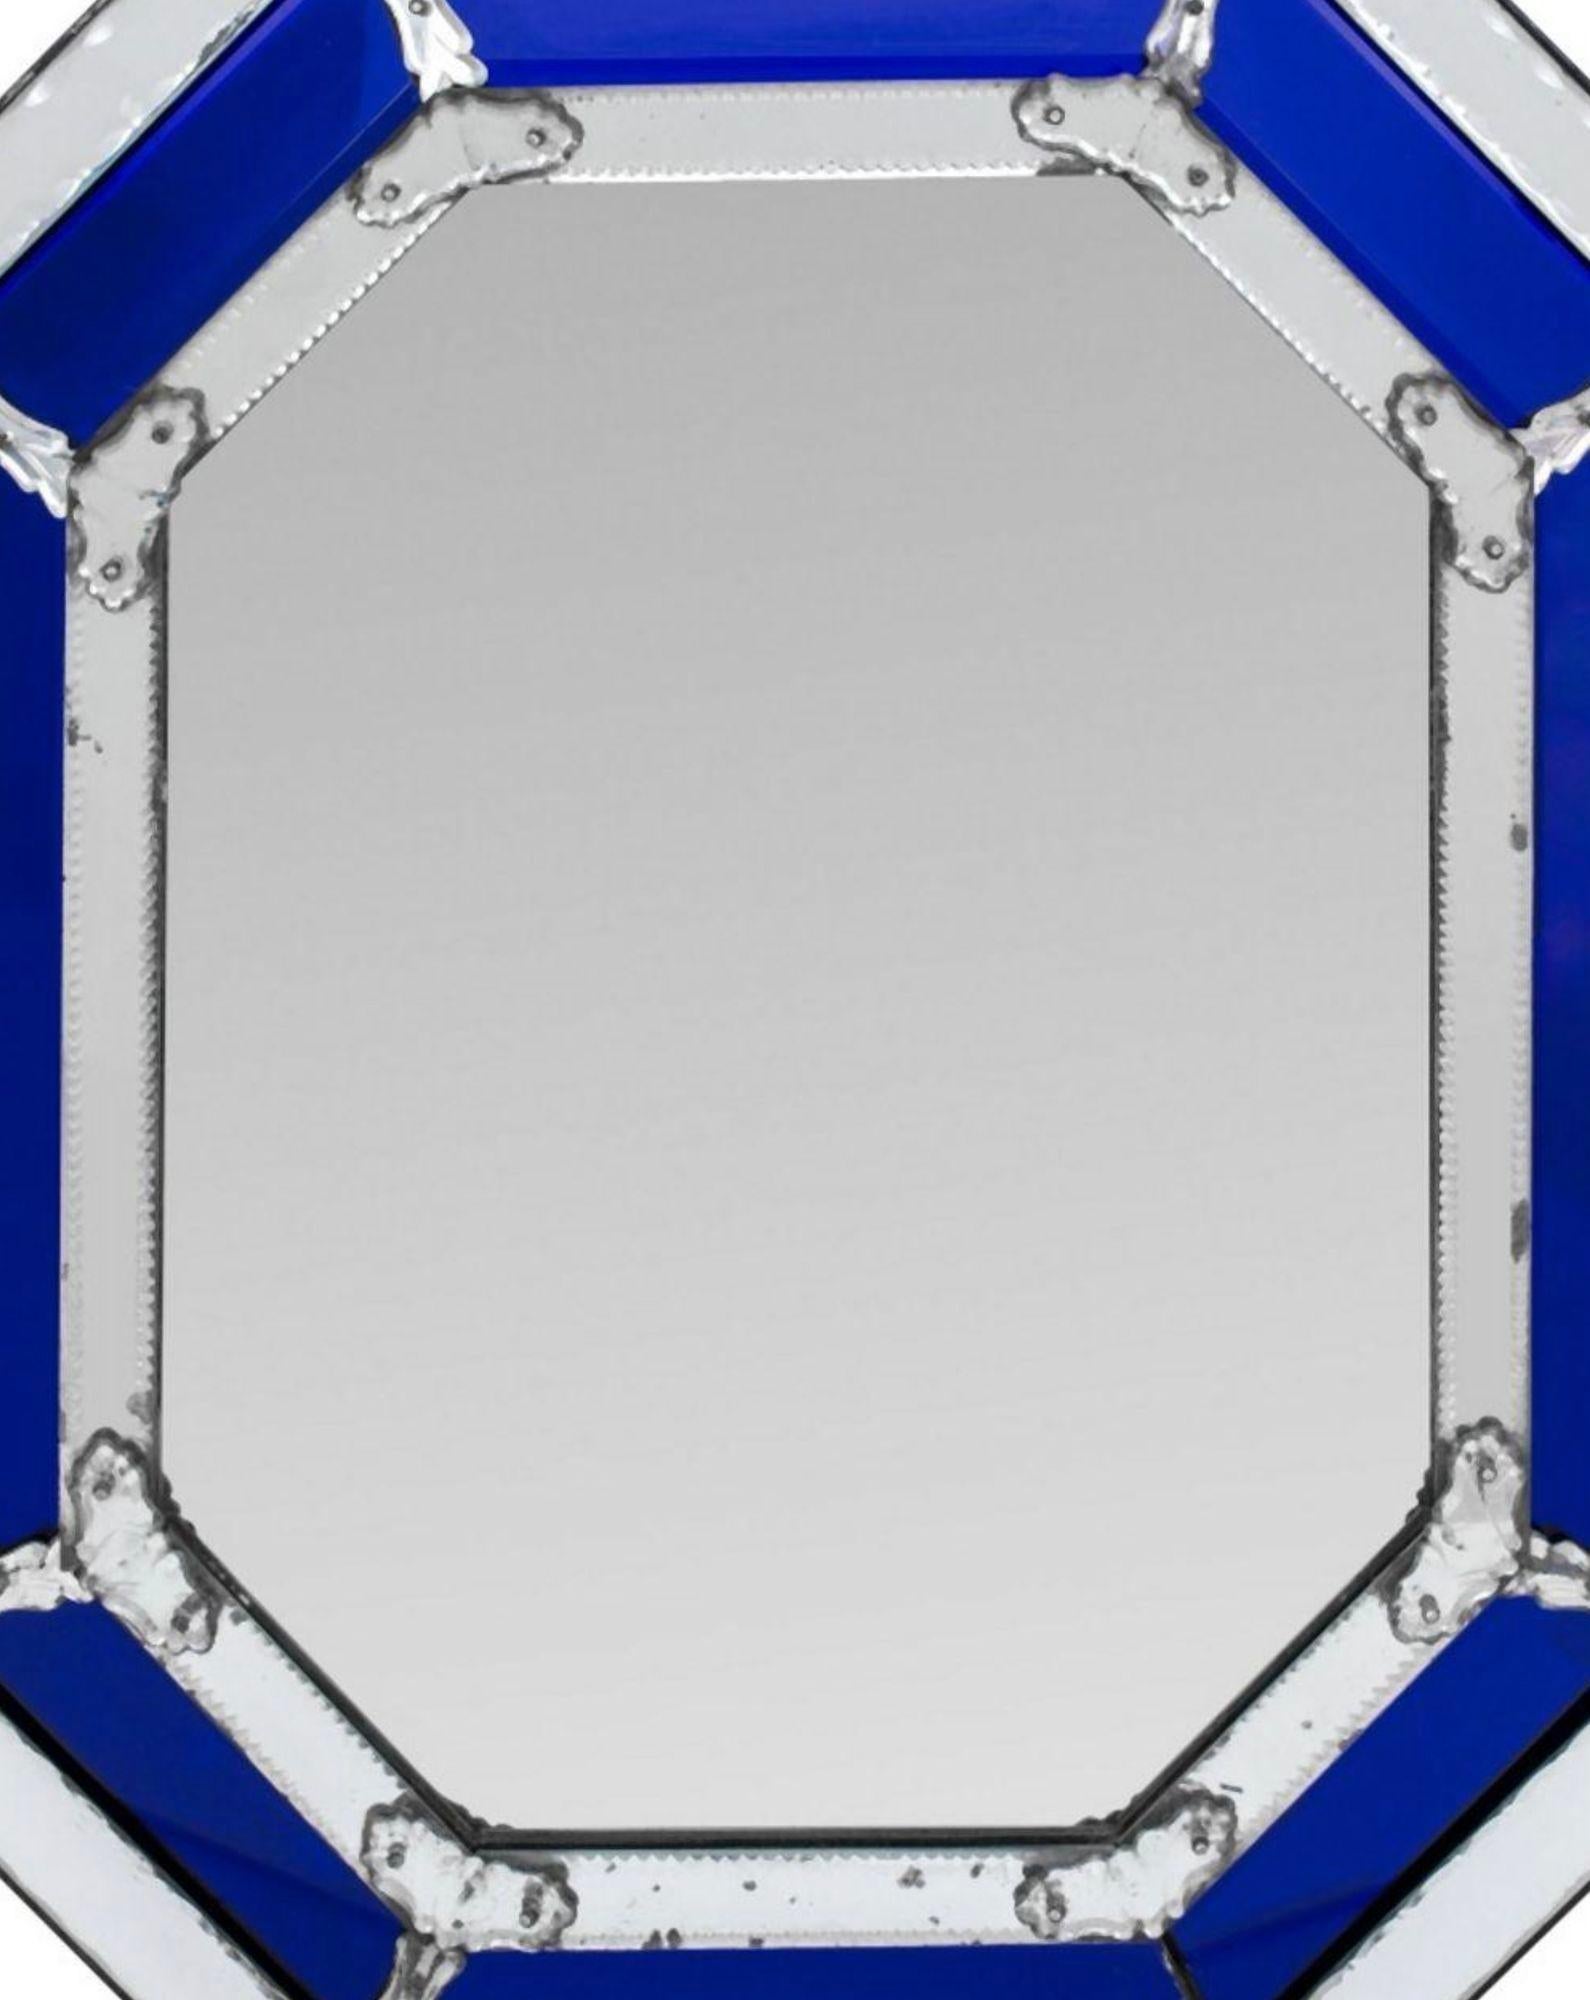 Stunning Venetian octagonal mirror, made in Italy during the 1960's, features a beveled mirror plate at its center, encased in a colorful frame of cobalt blue Murano glass panels. The rich hue of the Murano glass complements the beveled mirror plate